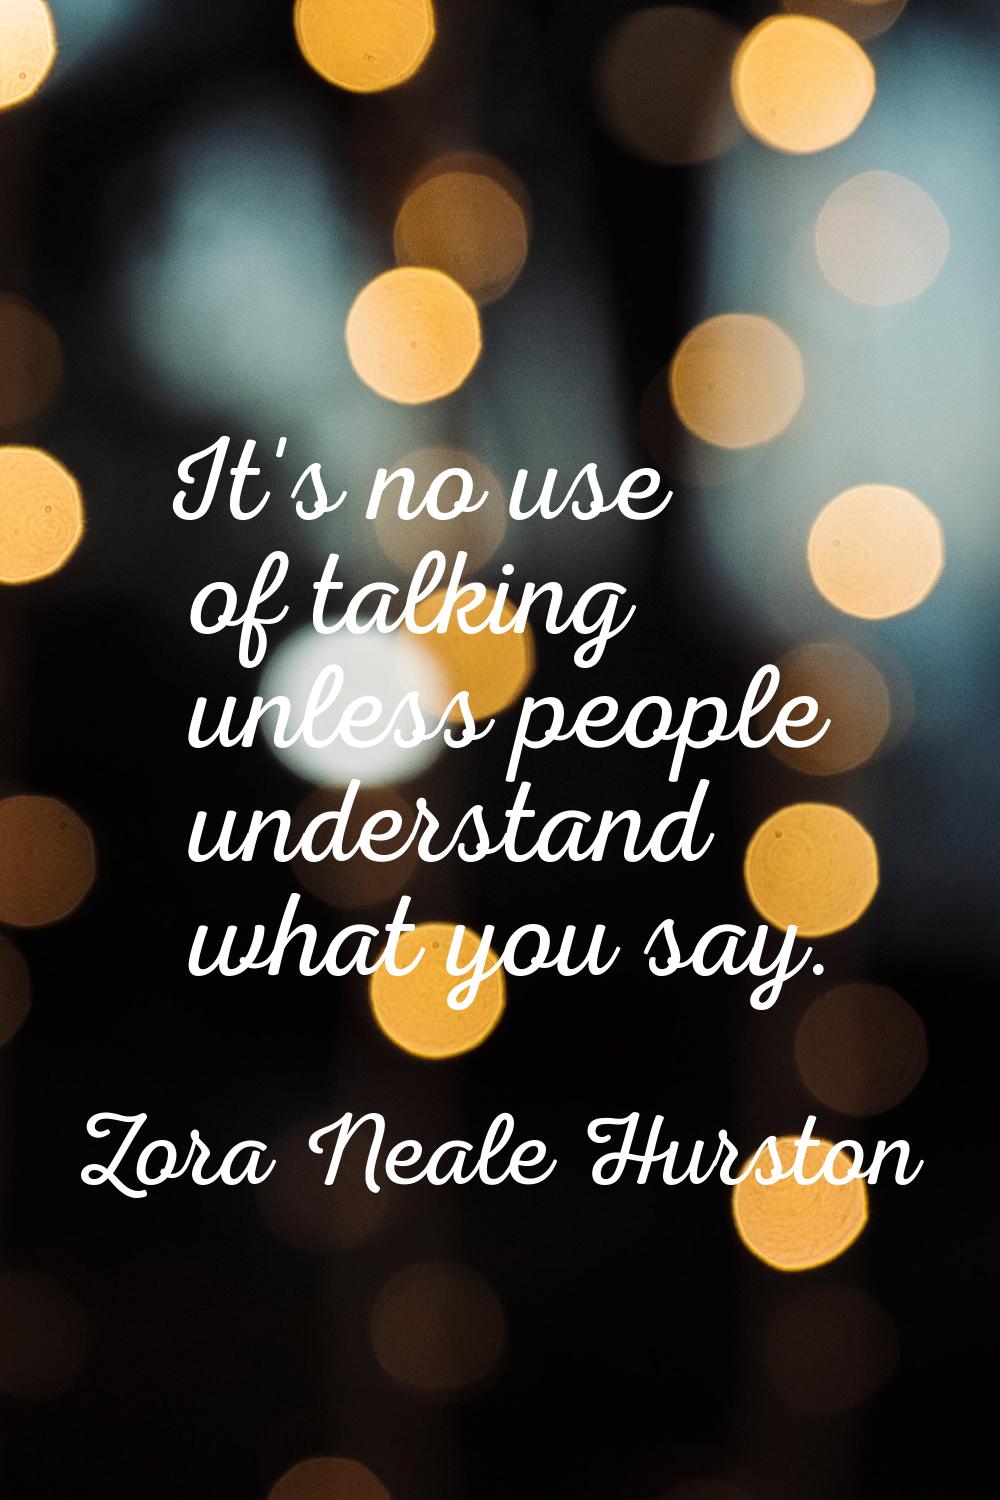 It's no use of talking unless people understand what you say.